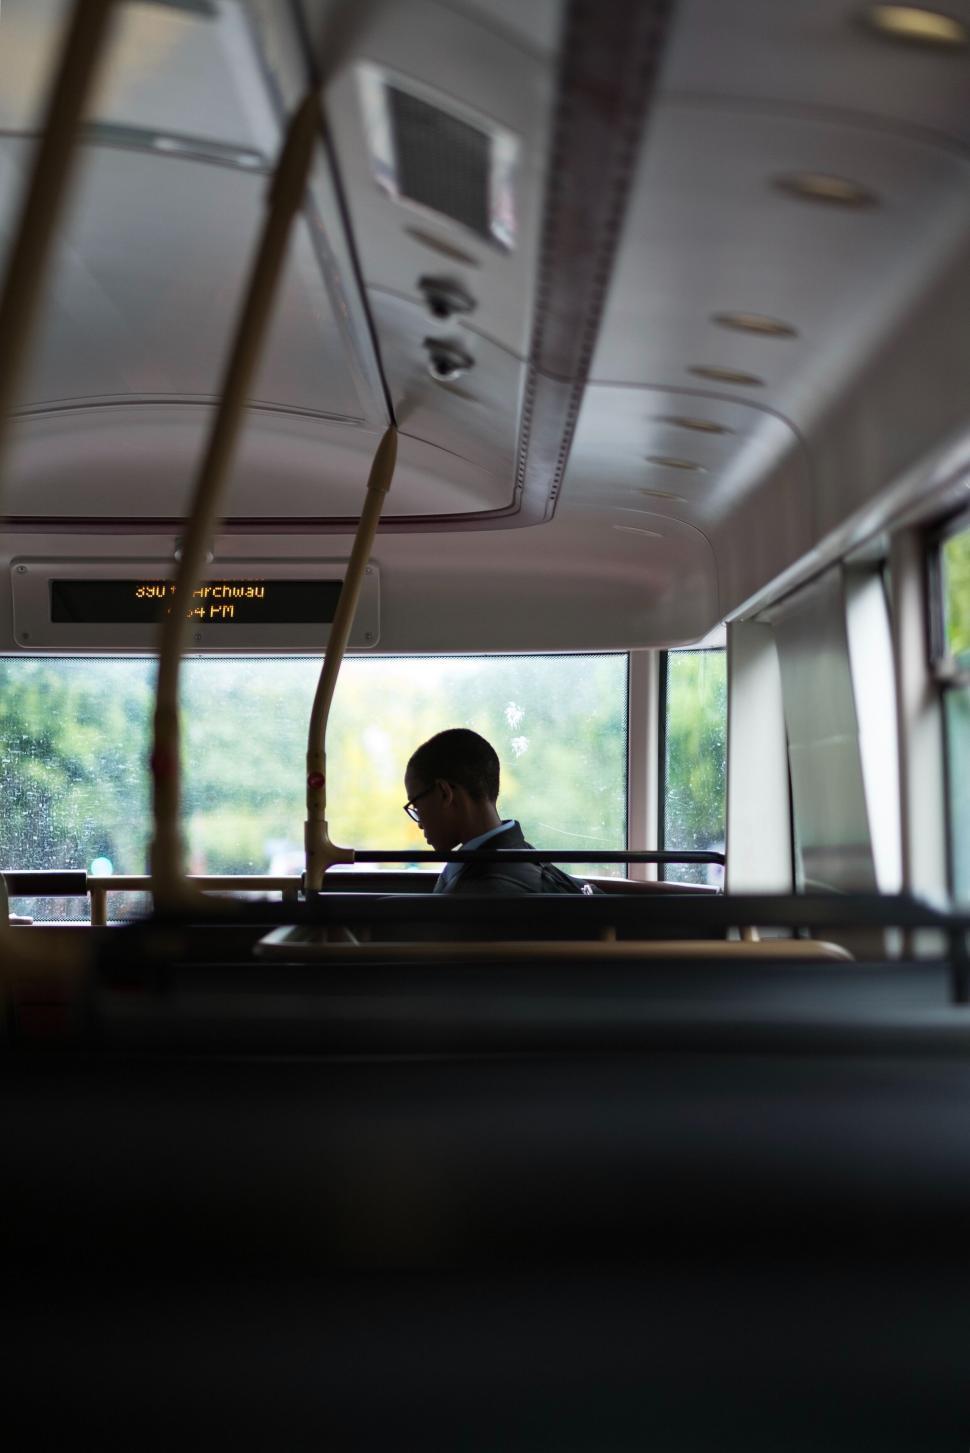 Free Image of Passenger silhouette in the bus during travel 